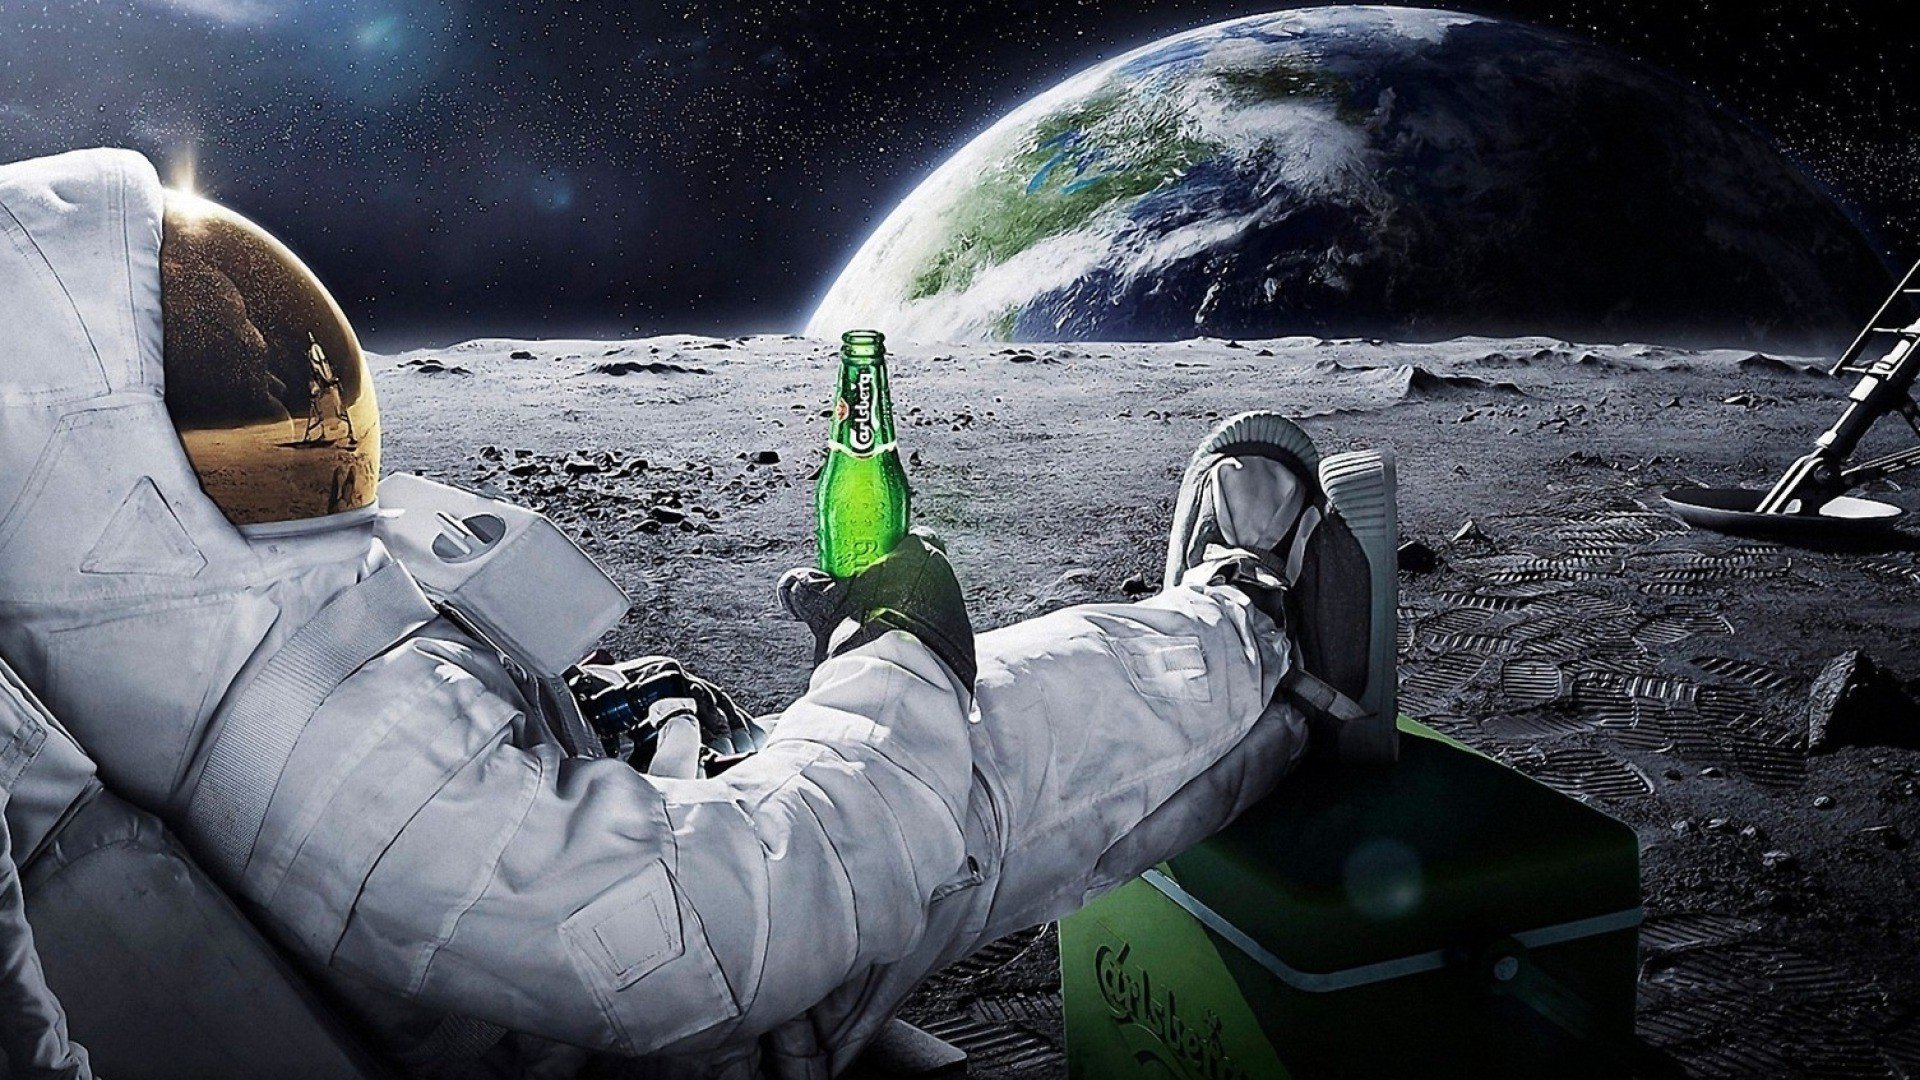 beers, Outer, Space, Moon, Earth, Funny, Spaceships, Relaxing, Carlsberg, Space, Suits, Cosmonaut Wallpaper